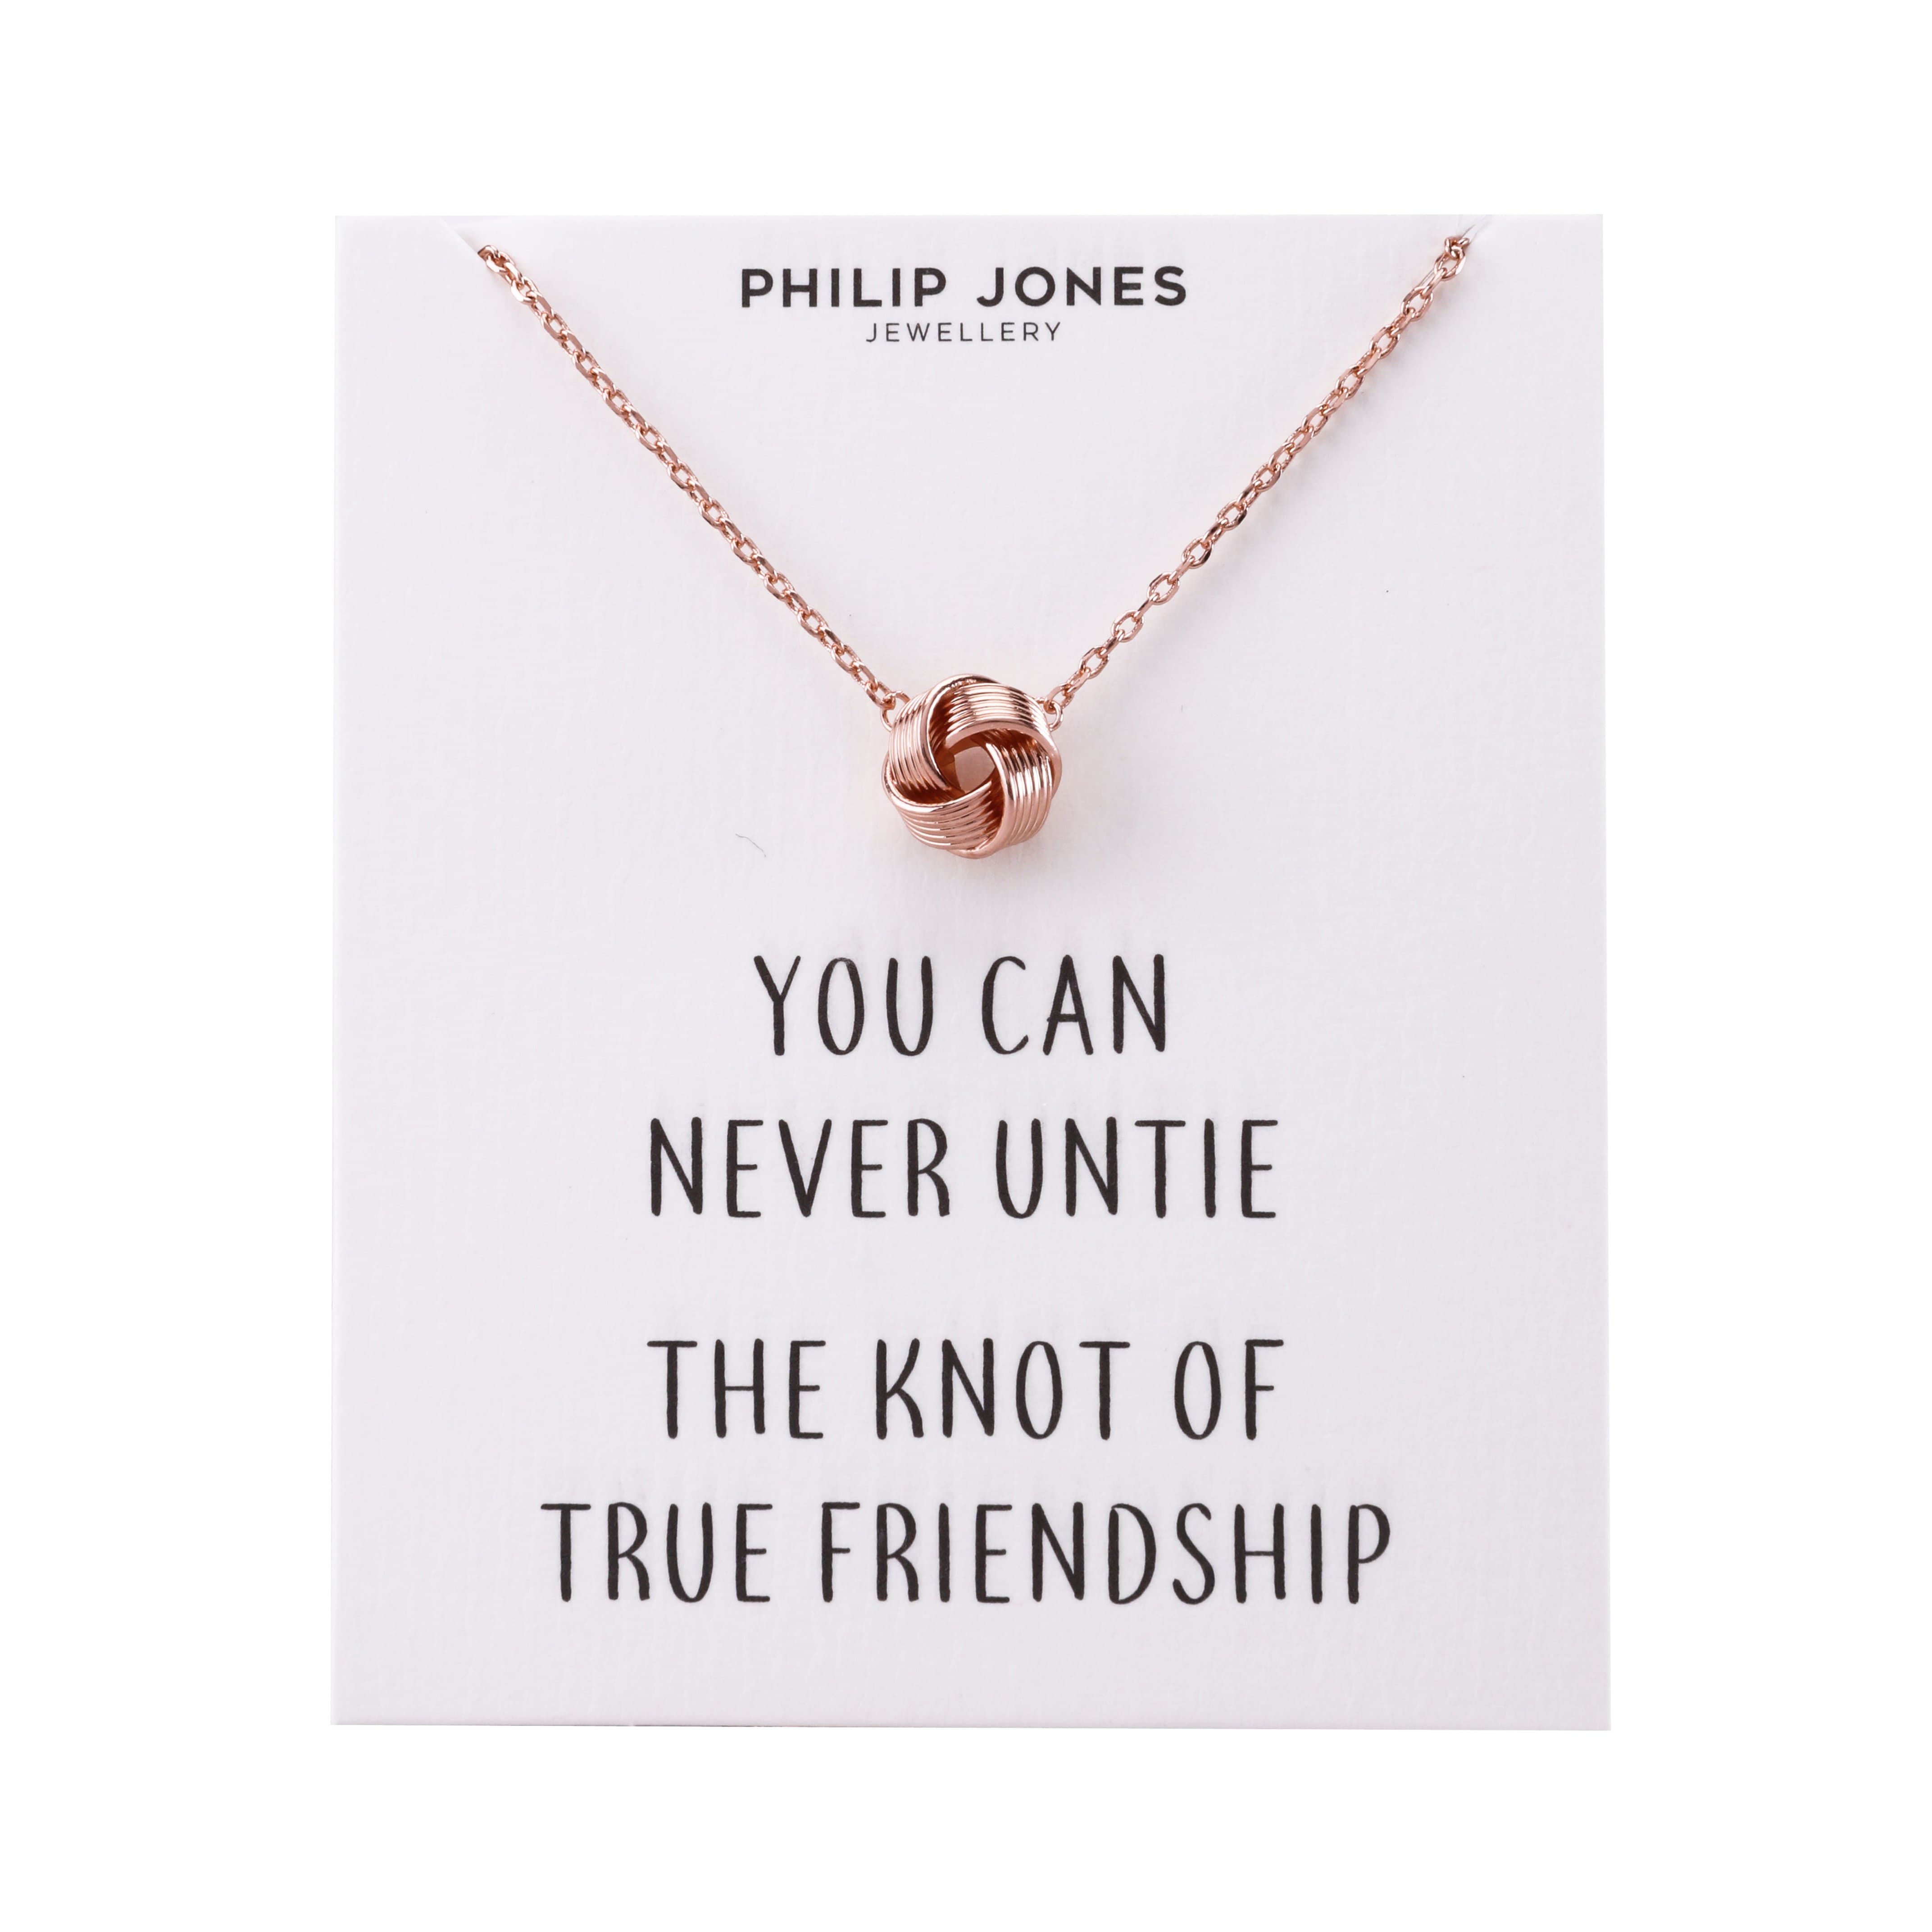 Rose Gold Plated Love Knot Necklace with Quote Card by Philip Jones Jewellery